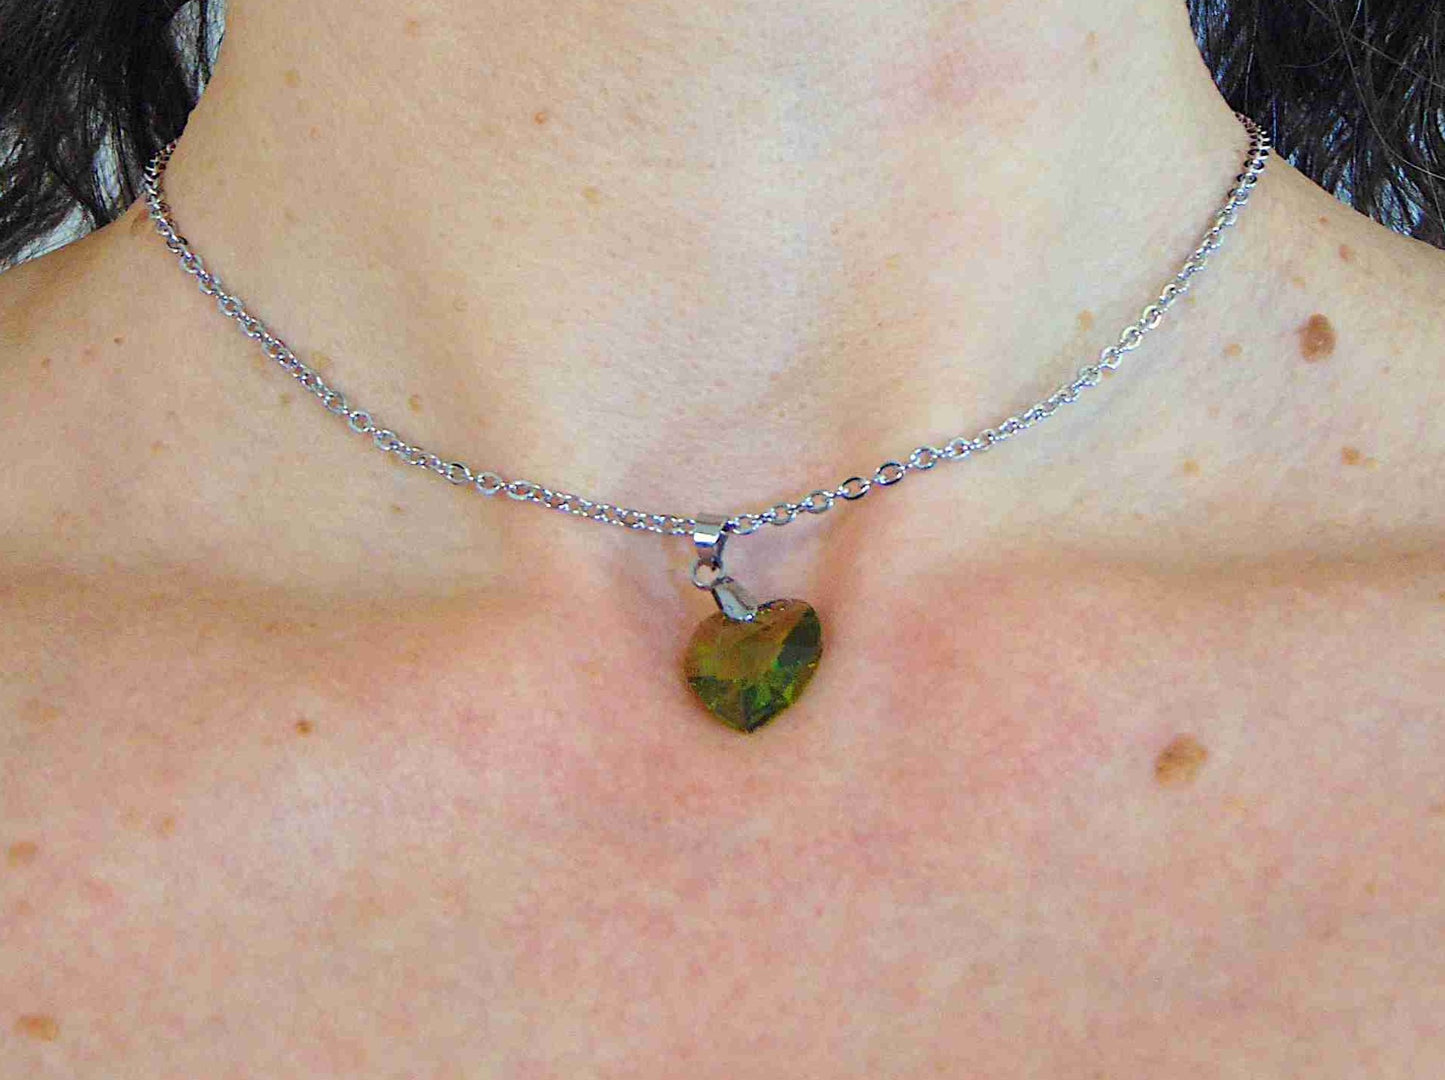 14/16-inch necklace with 14mm Olivine faceted Swarovski crystal heart pendant, rose gold-toned stainless steel chain